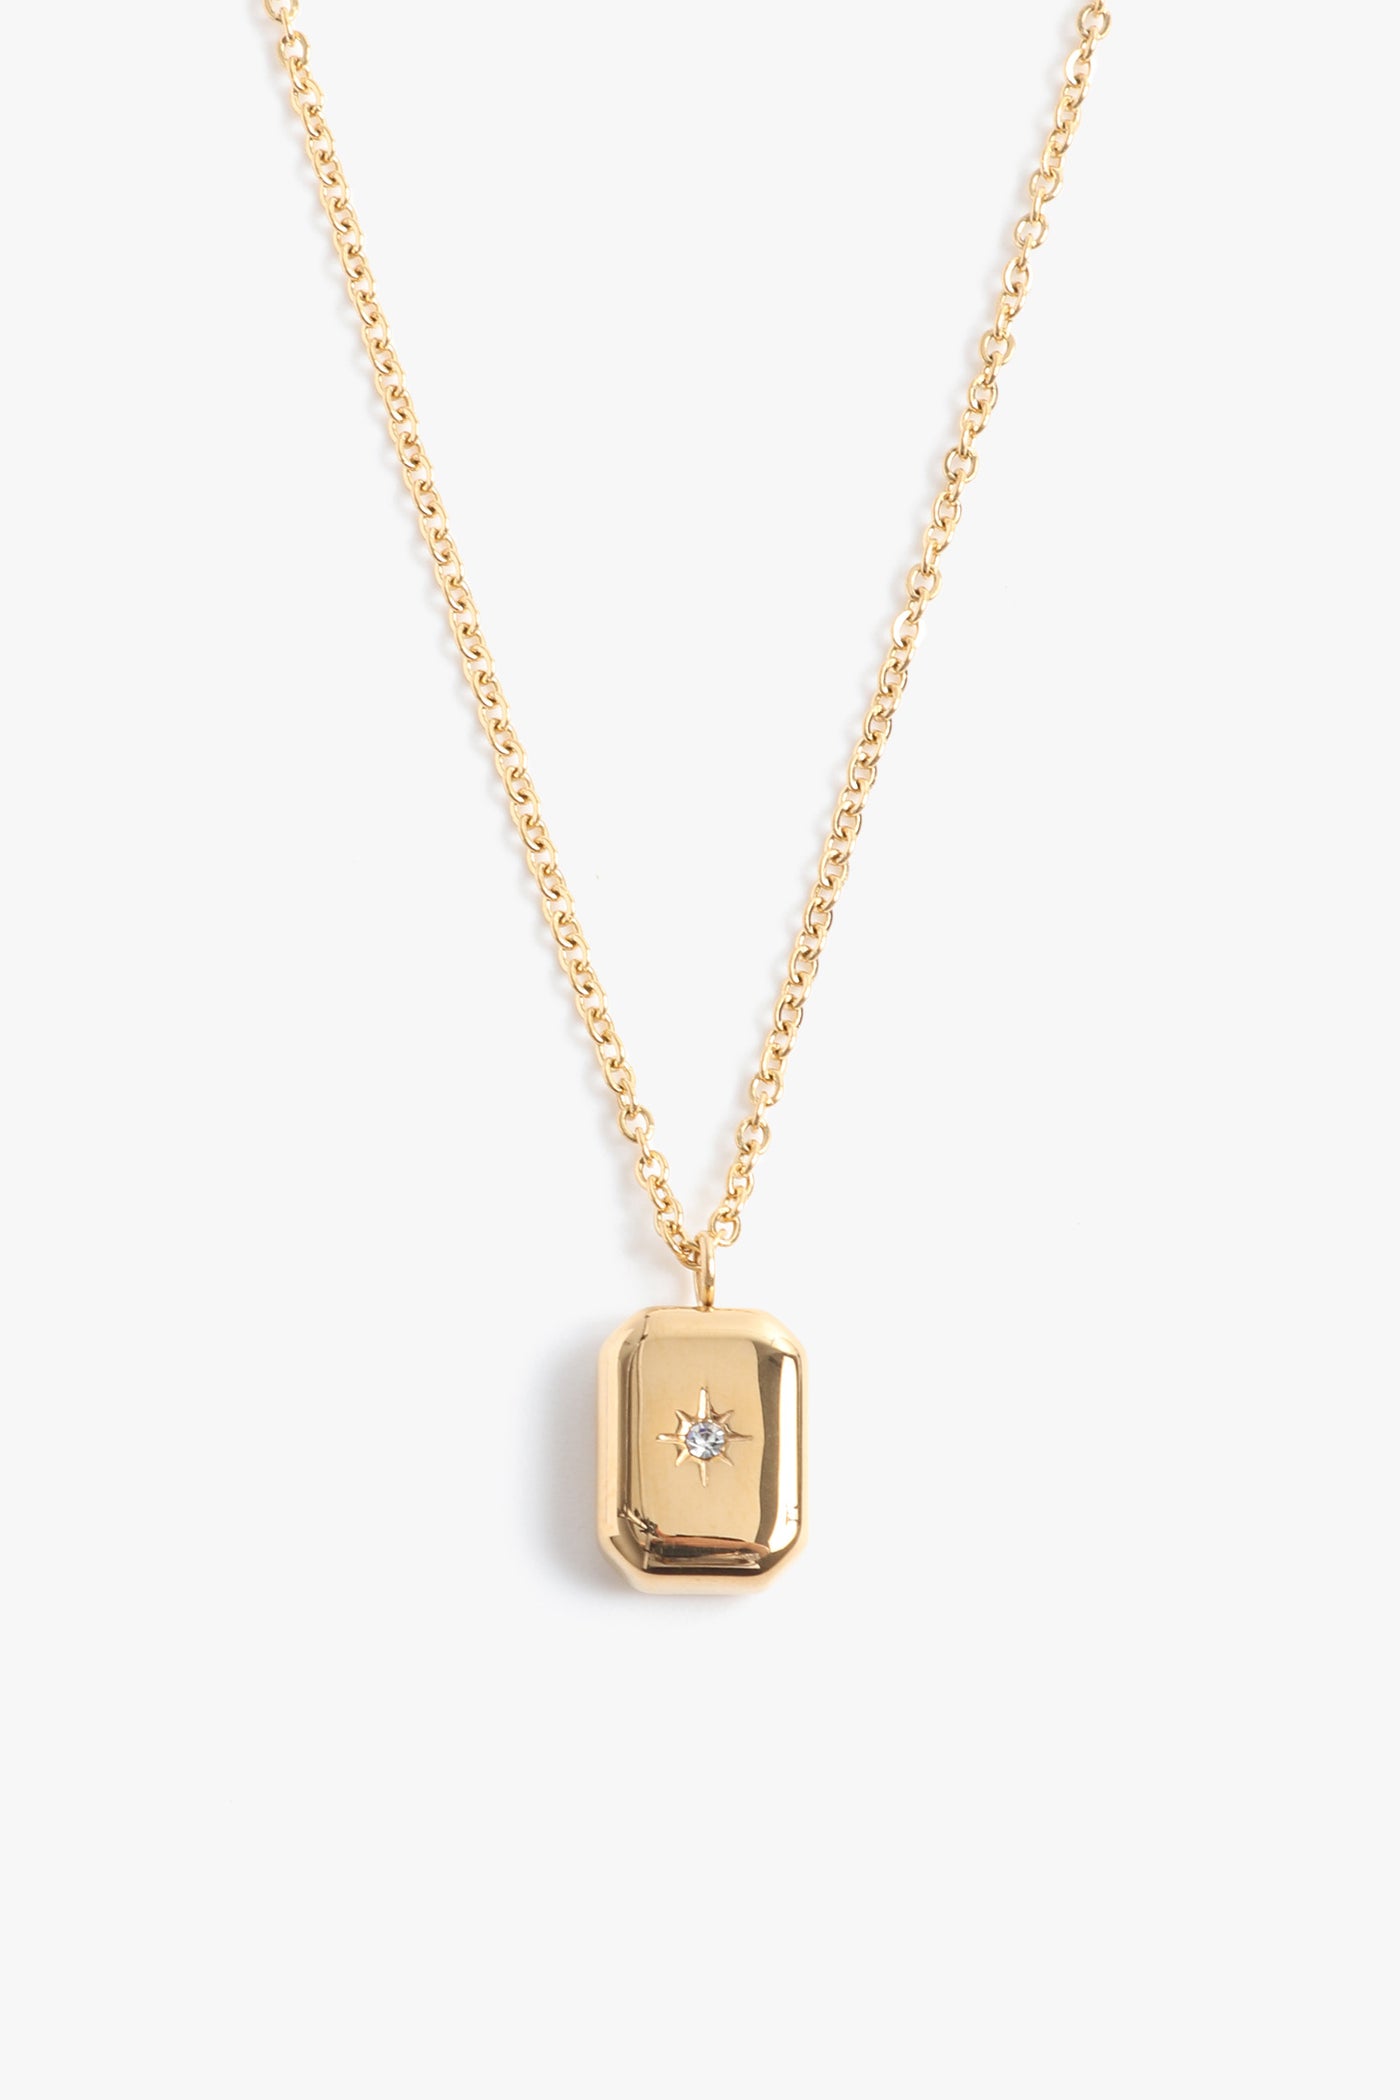 Marrin Costello Jewelry Orion Signet Pendant necklace with square pendant. Pendant is engraved with a star and CZ detail with spring ring clasp closure and extender. Waterproof, sustainable, hypoallergenic. 14k gold plated stainless steel.